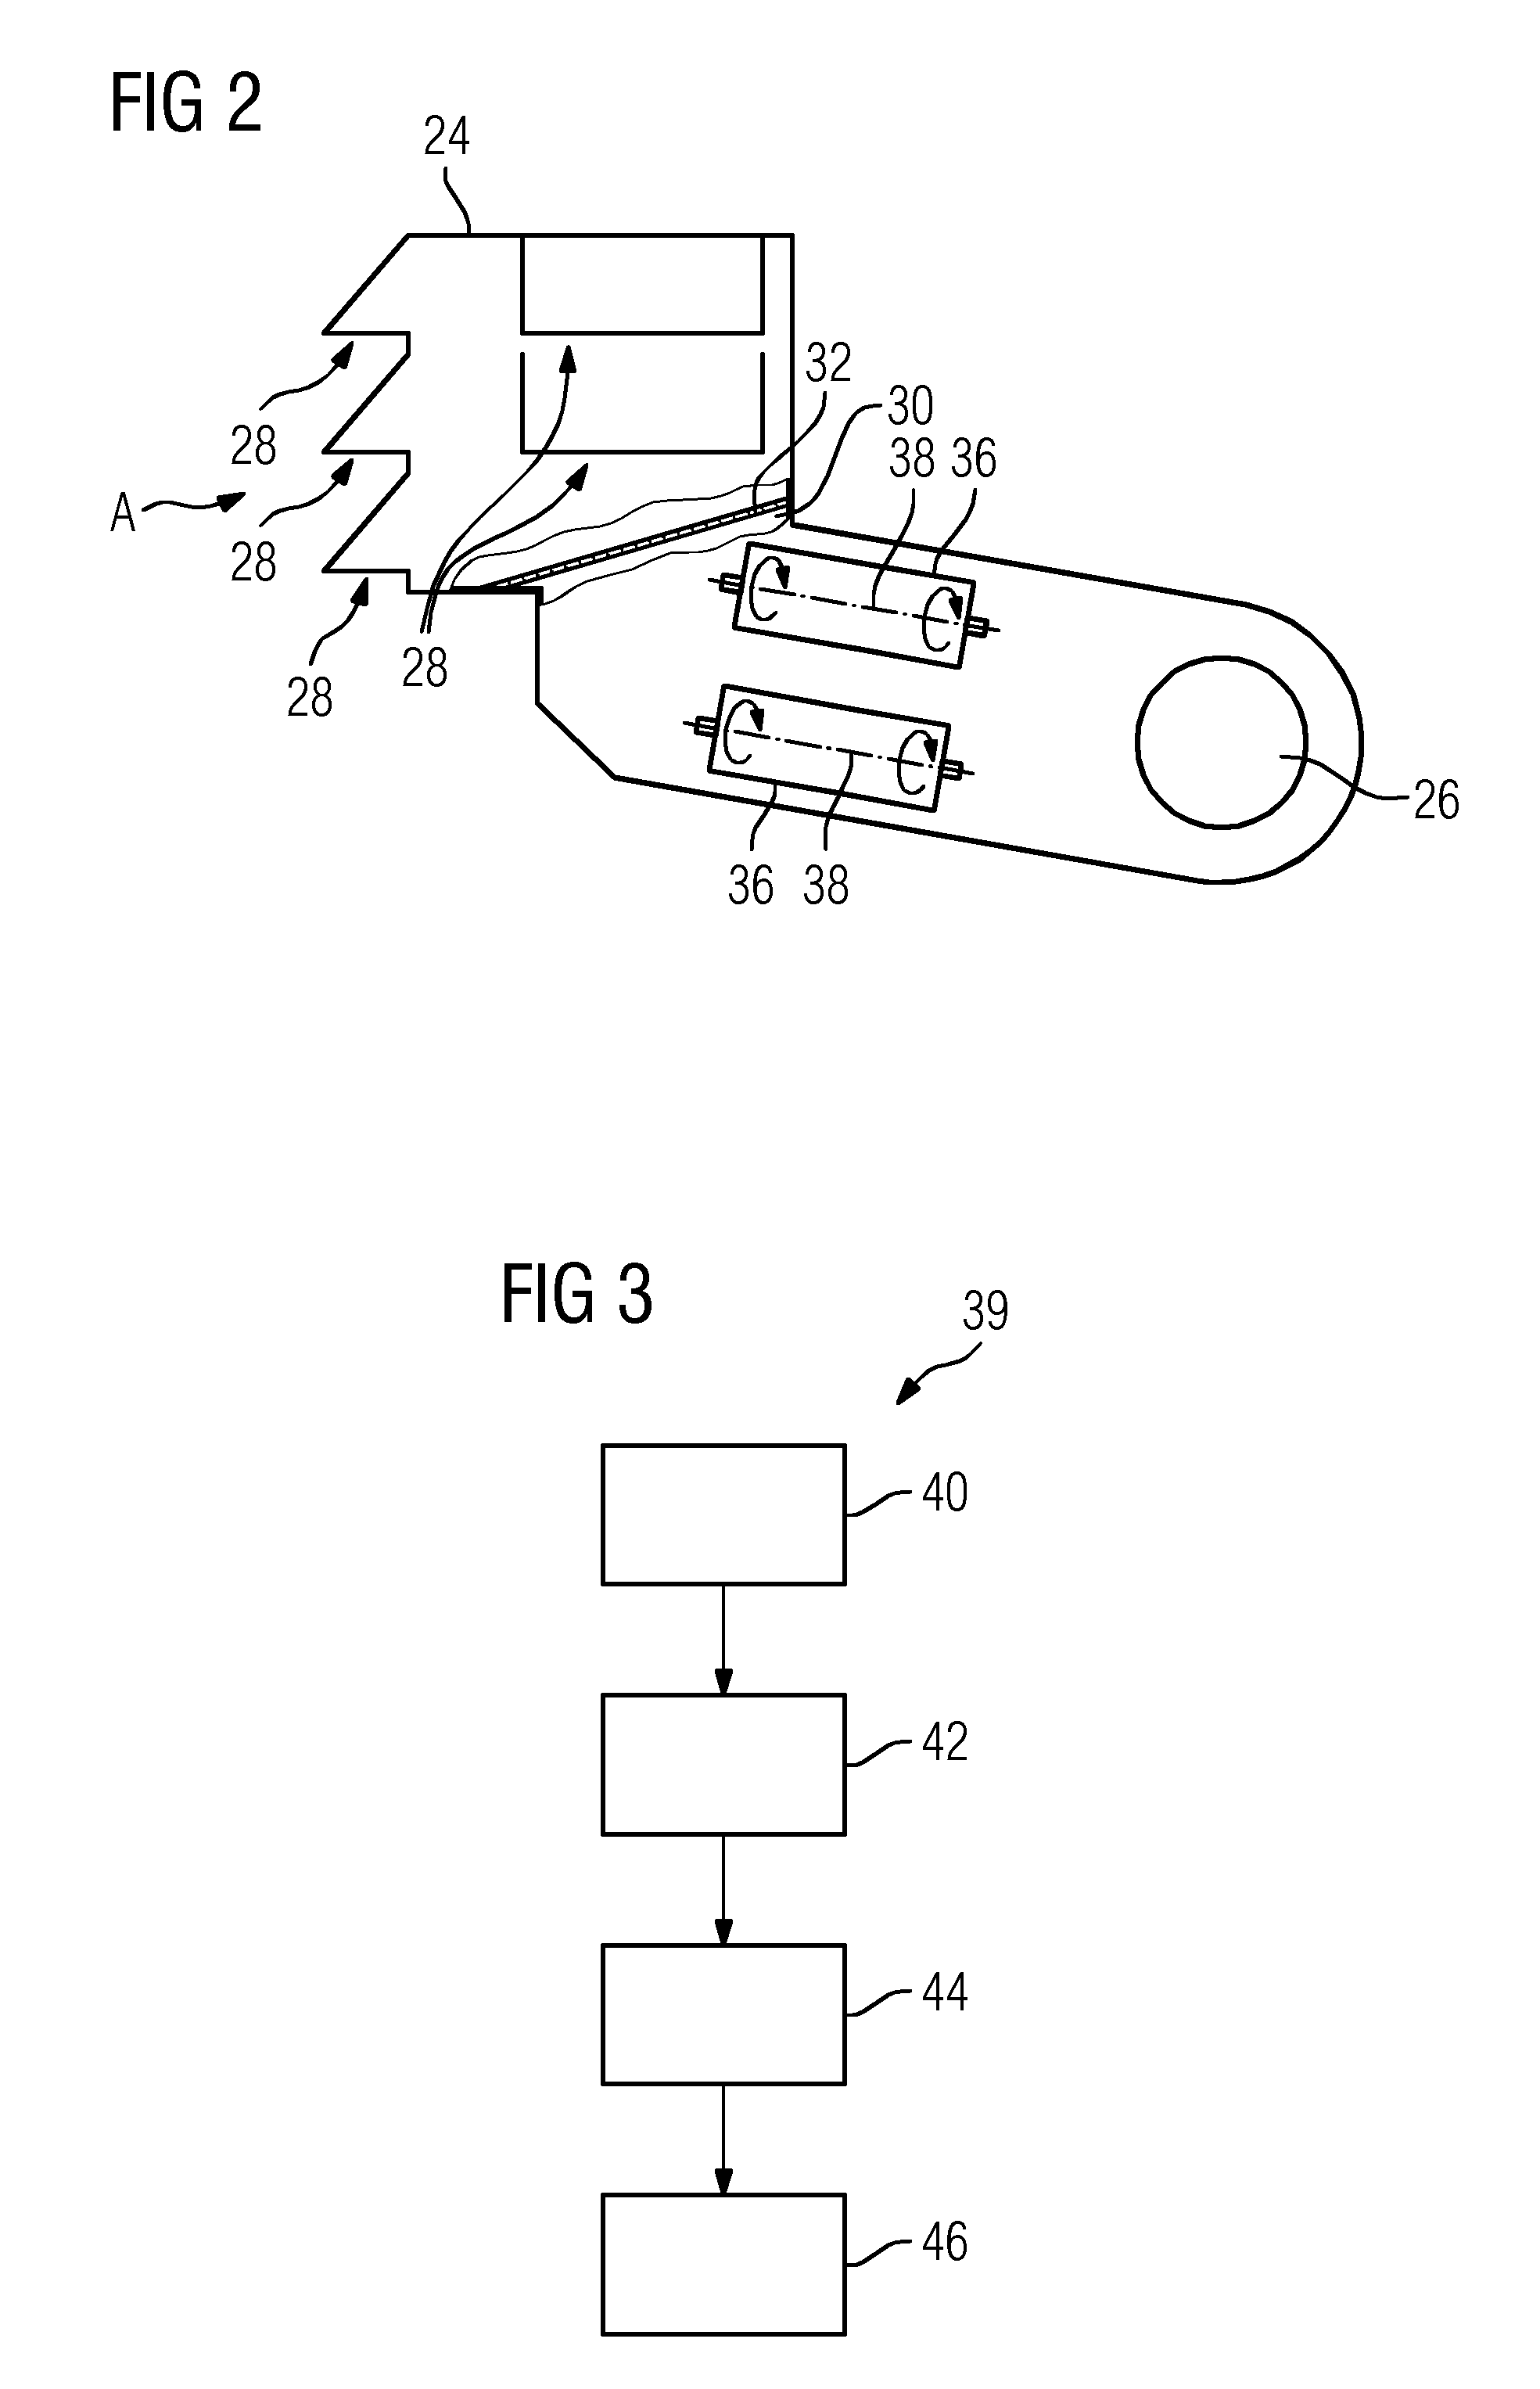 Method for operating a static gas turbine, and intake duct for intake air of a gas turbine